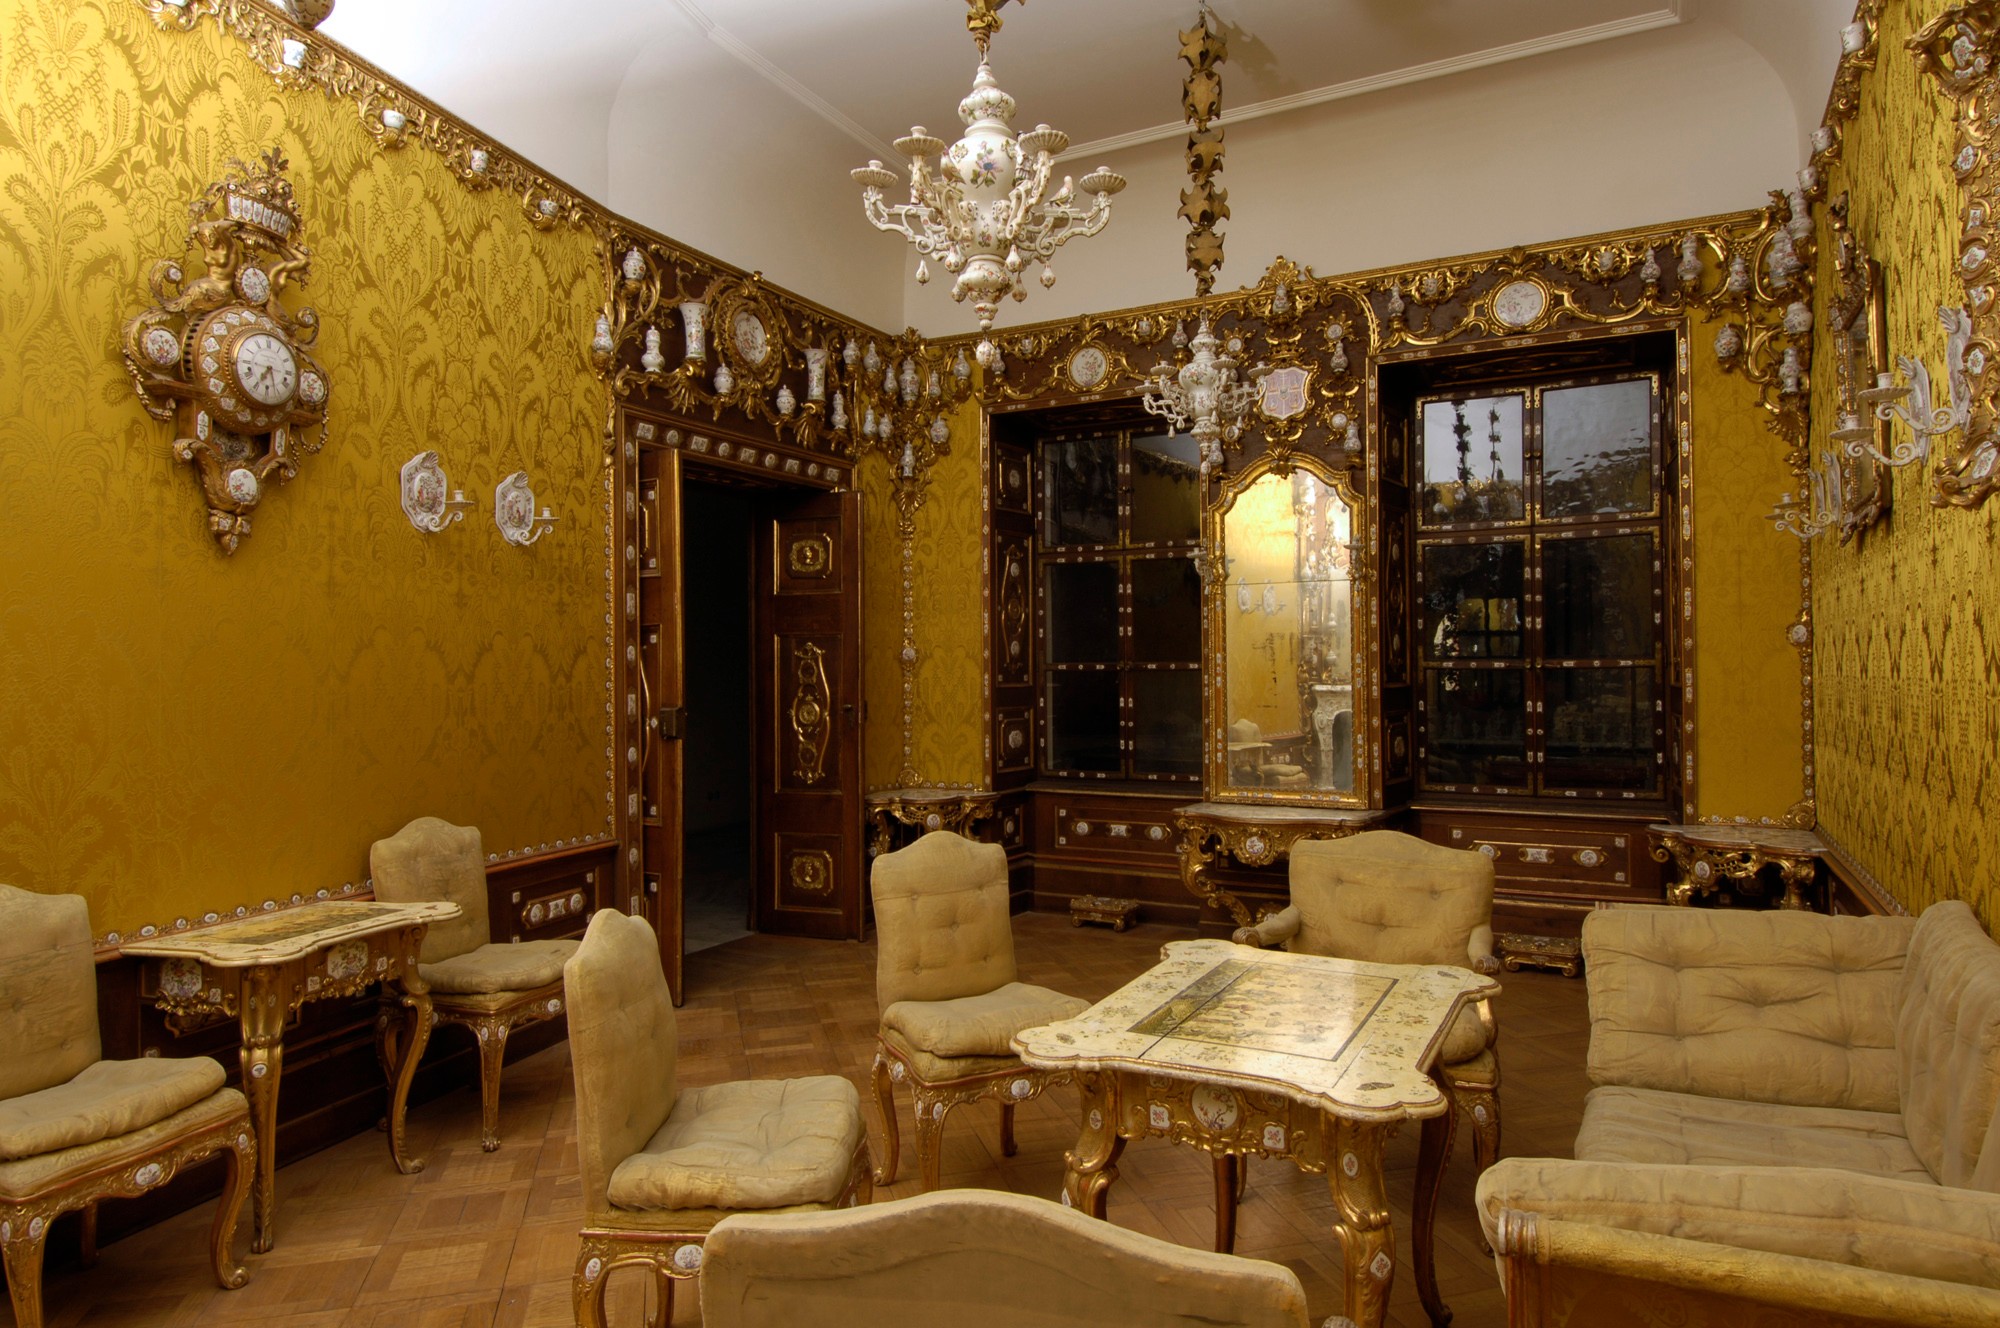 PORCELAIN ROOM FROM DUBSKY PALACE IN BRNO